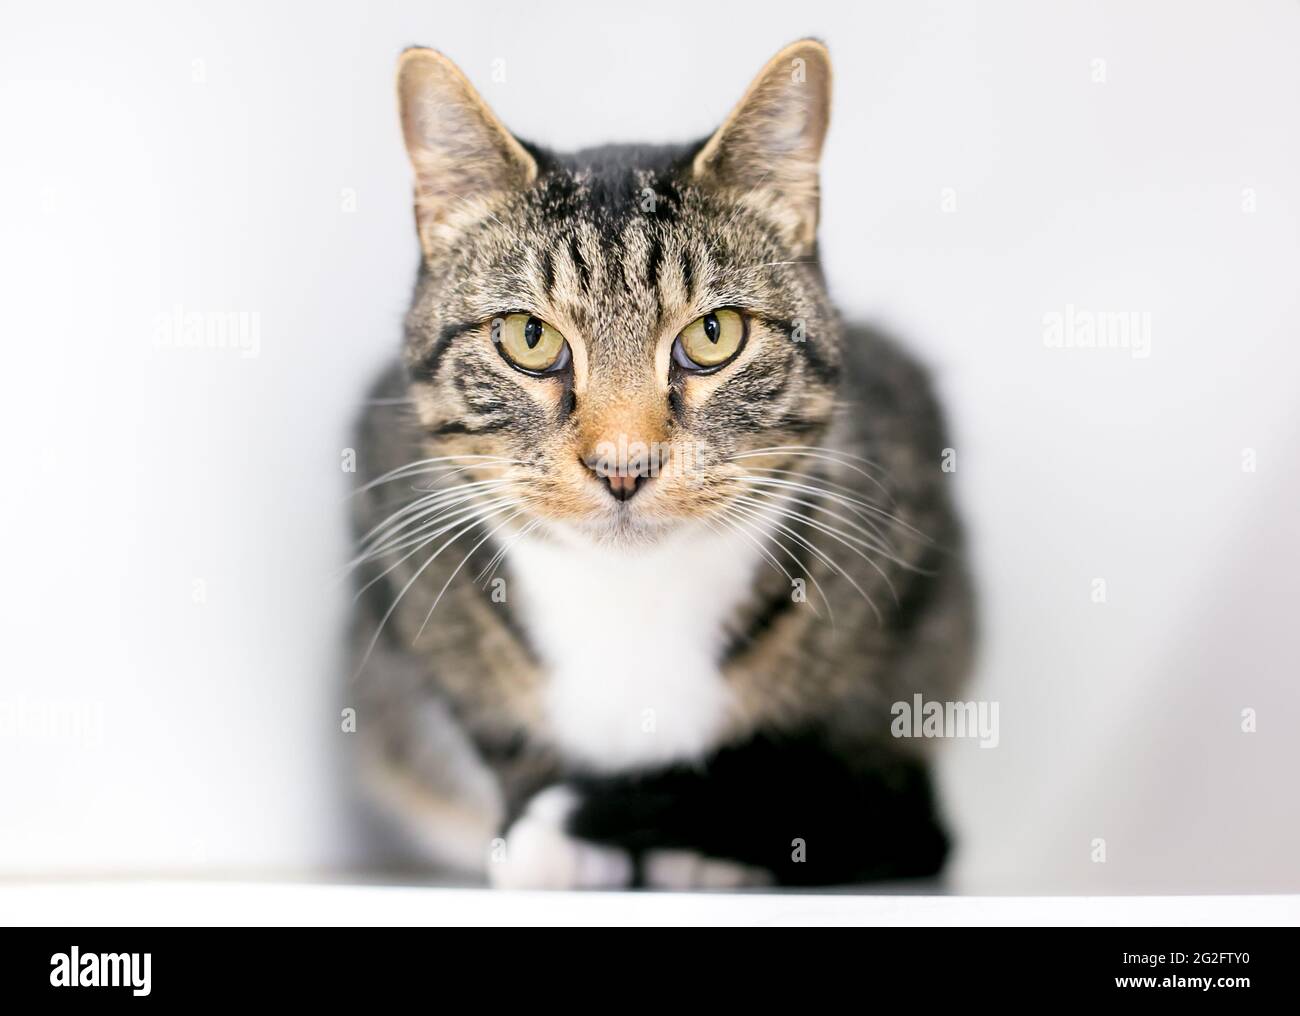 A shorthair tabby cat crouching and staring at the camera with a serious expression Stock Photo